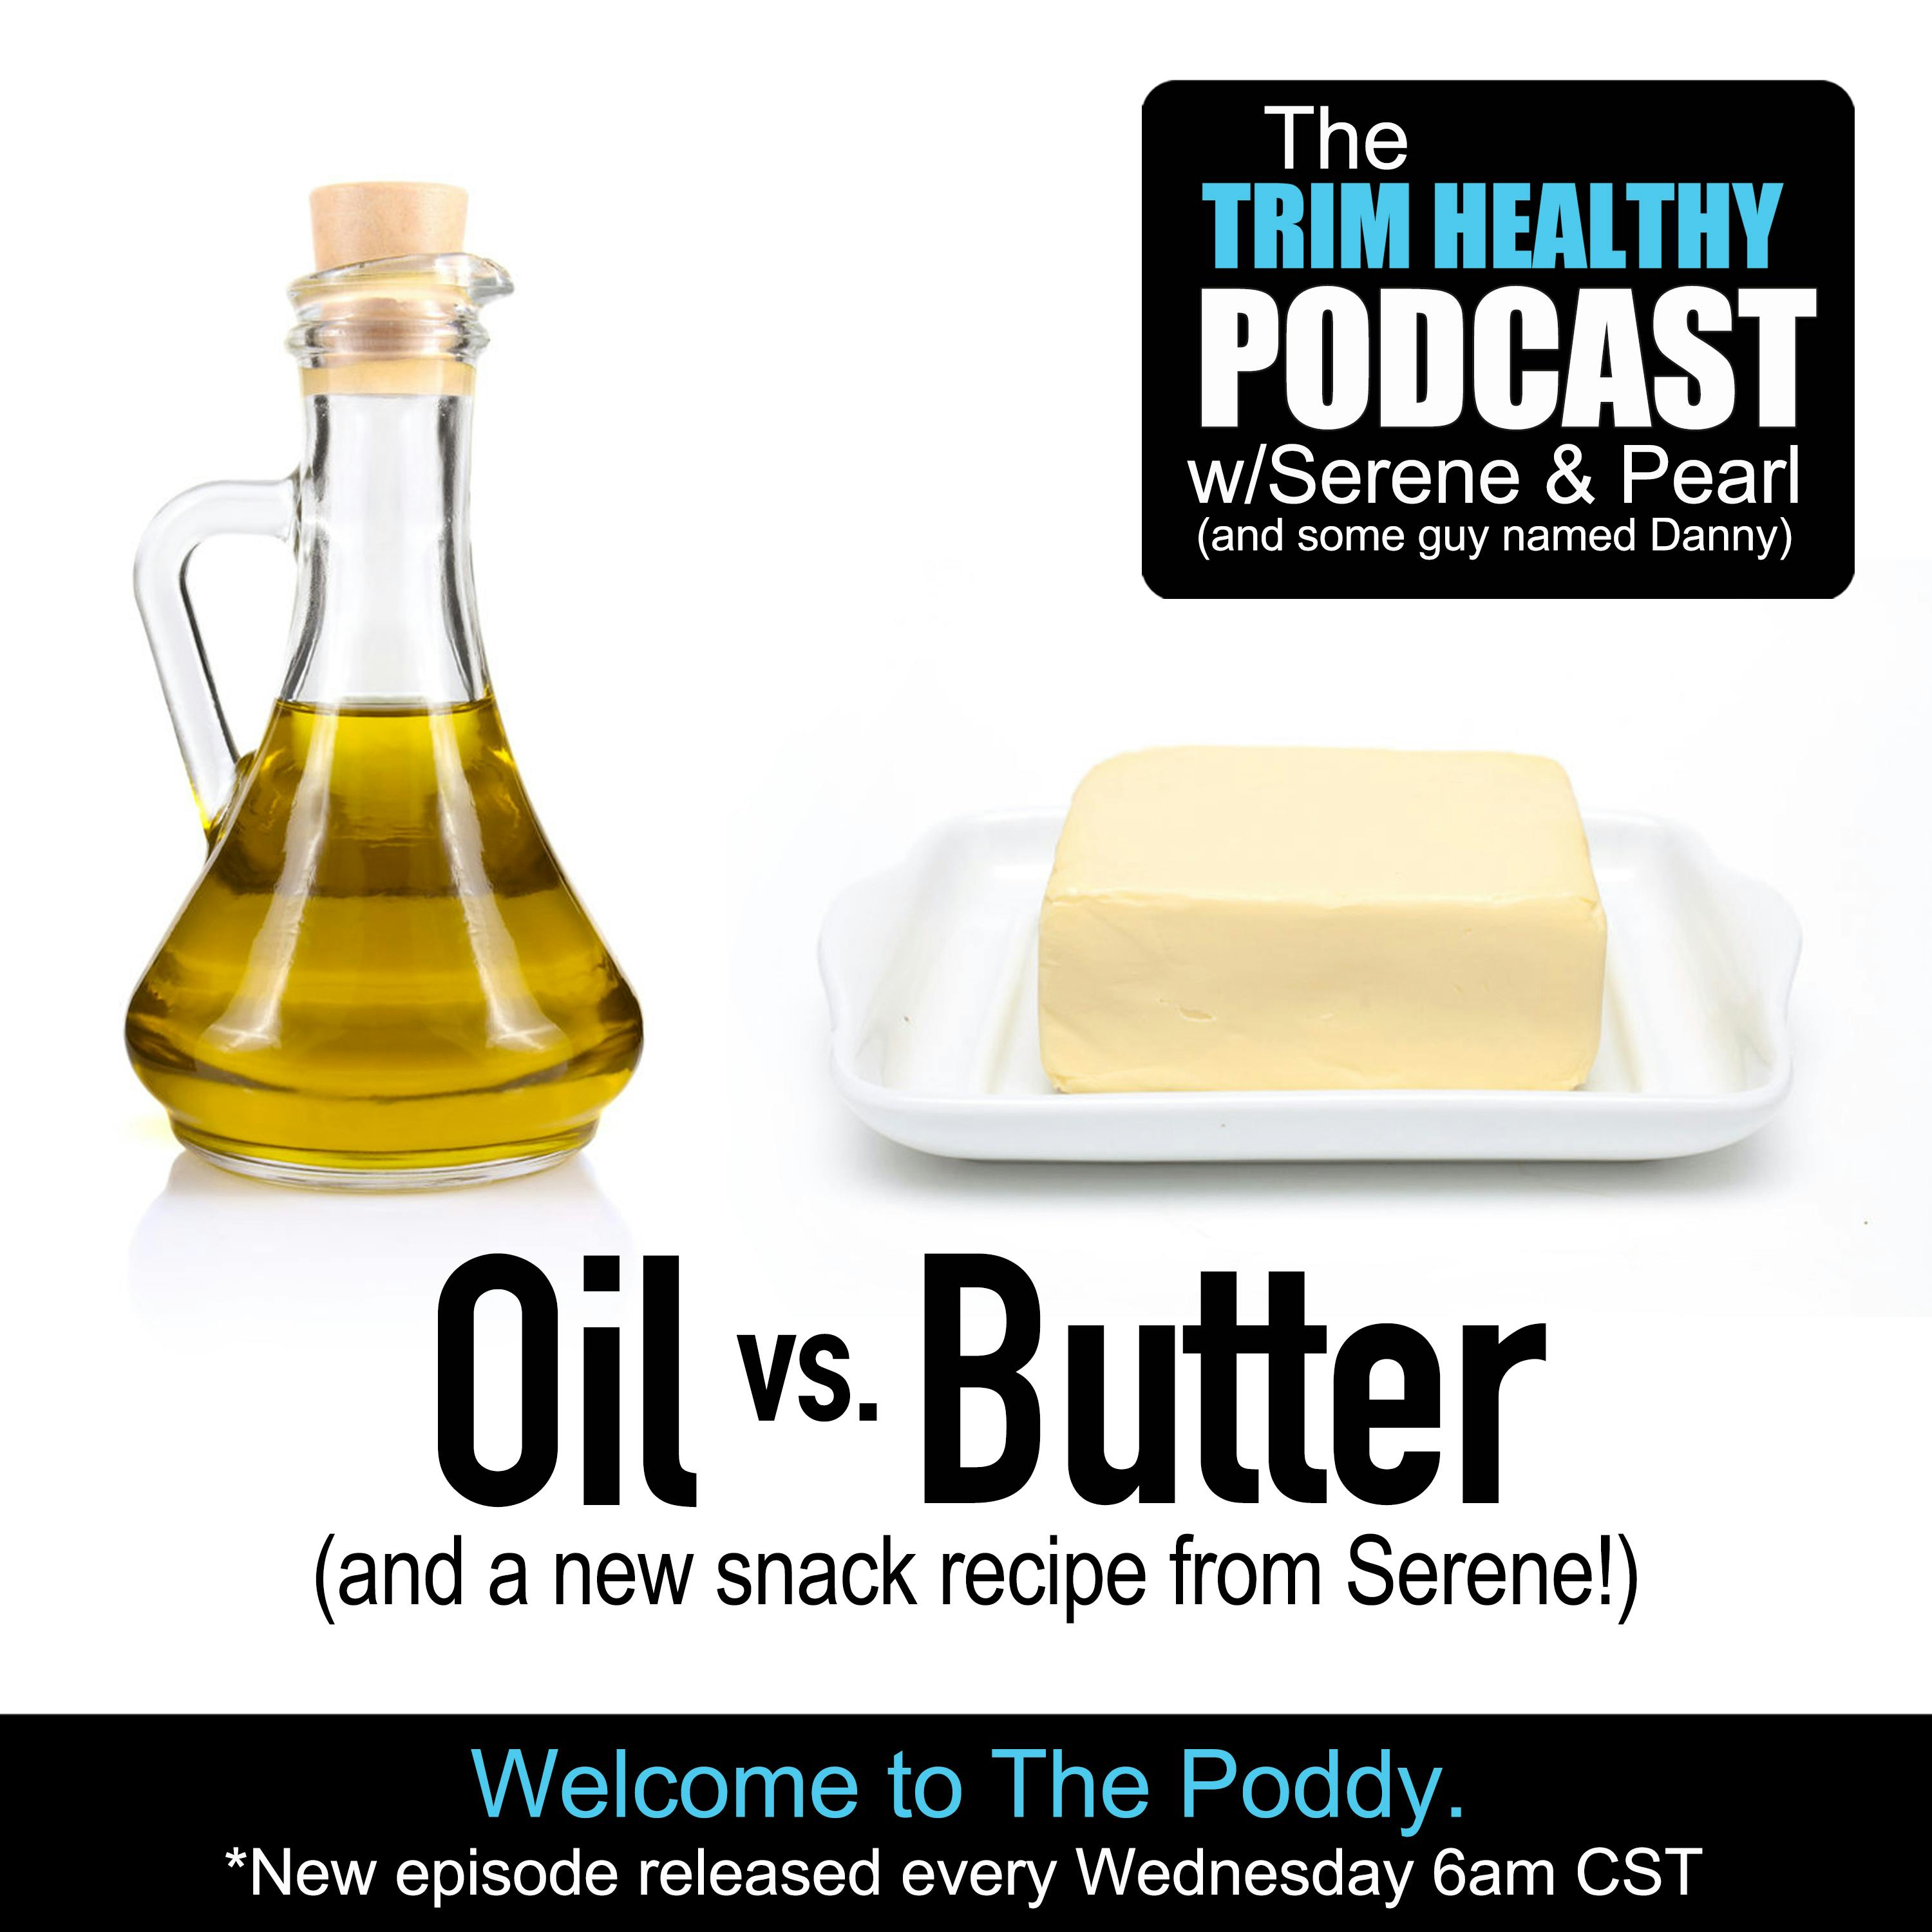 Ep 244: Oil vs. Butter (and a new snack recipe from Serene!)